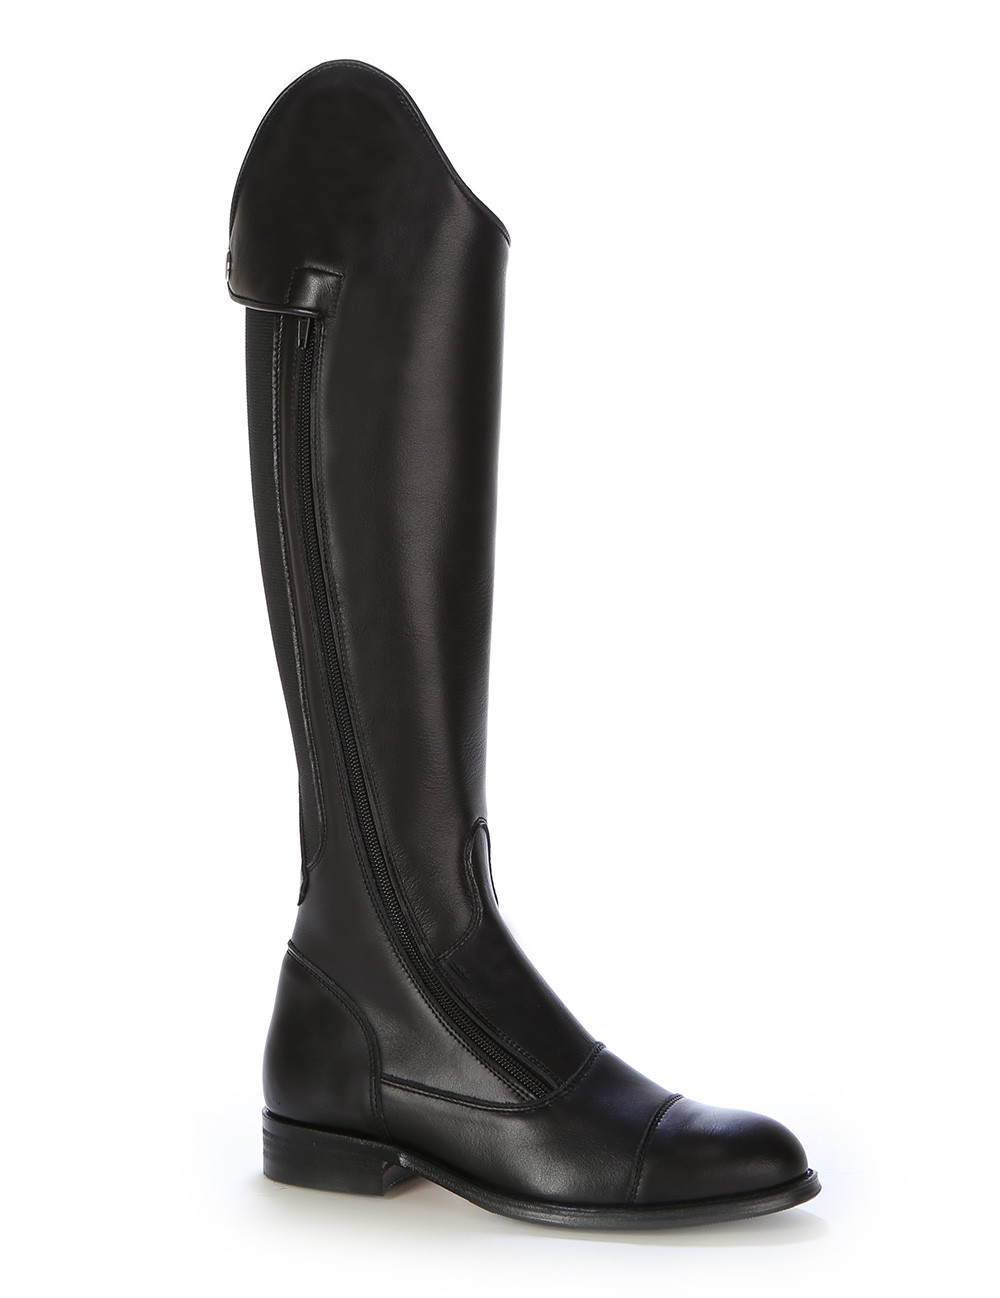 horse riding boots